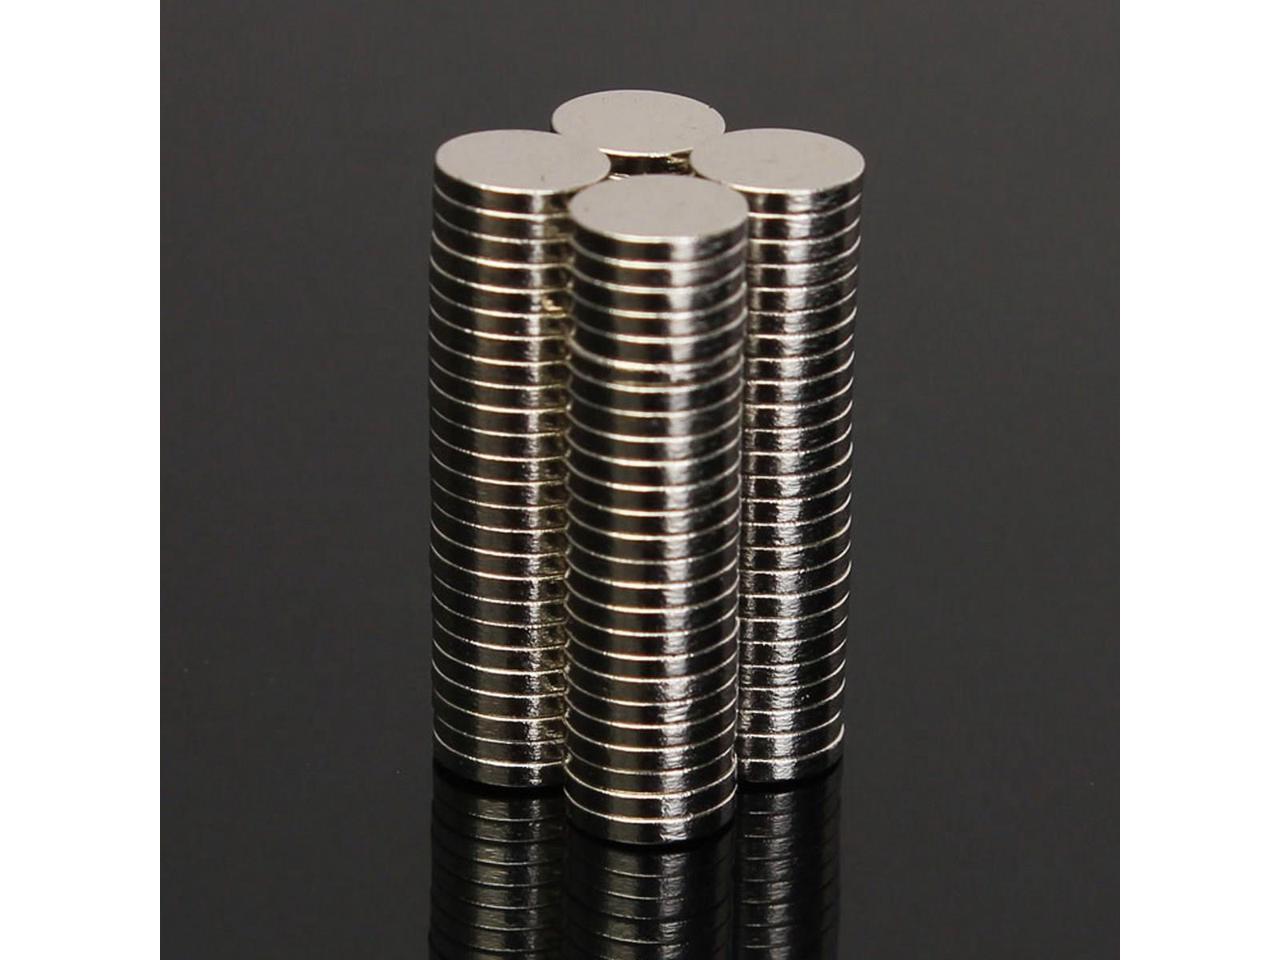 6x Super Strong 20mm x 4mm Disc with 5mm Hole Neodymium Round Hole Magnets 